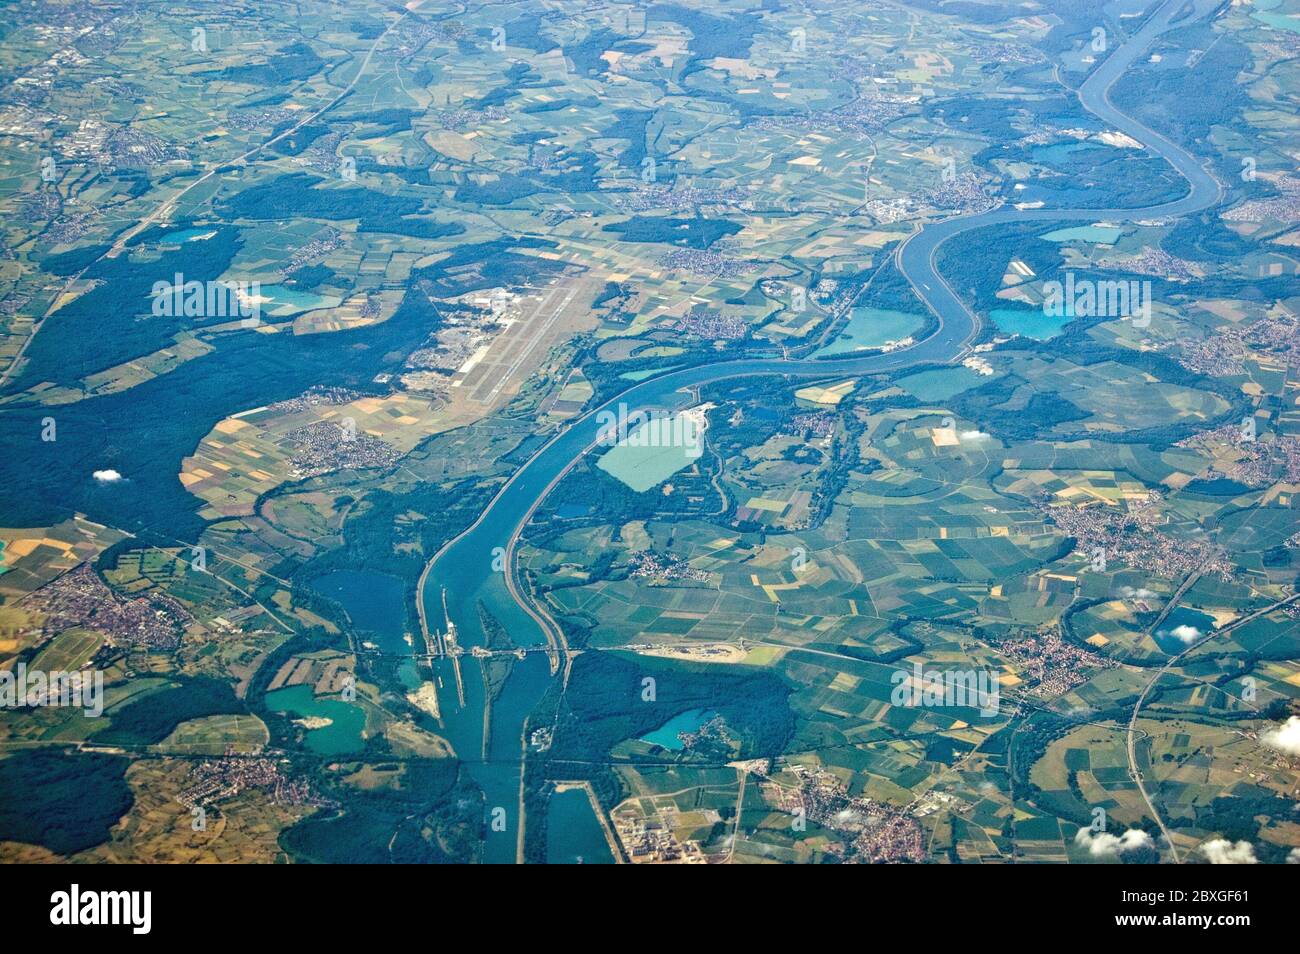 View from the air of the Iffezheim Barrage on the upper River Rhine. The barrage produces hydroelectricity. Beyond is Karlsruhe-Soellingen airport. Stock Photo